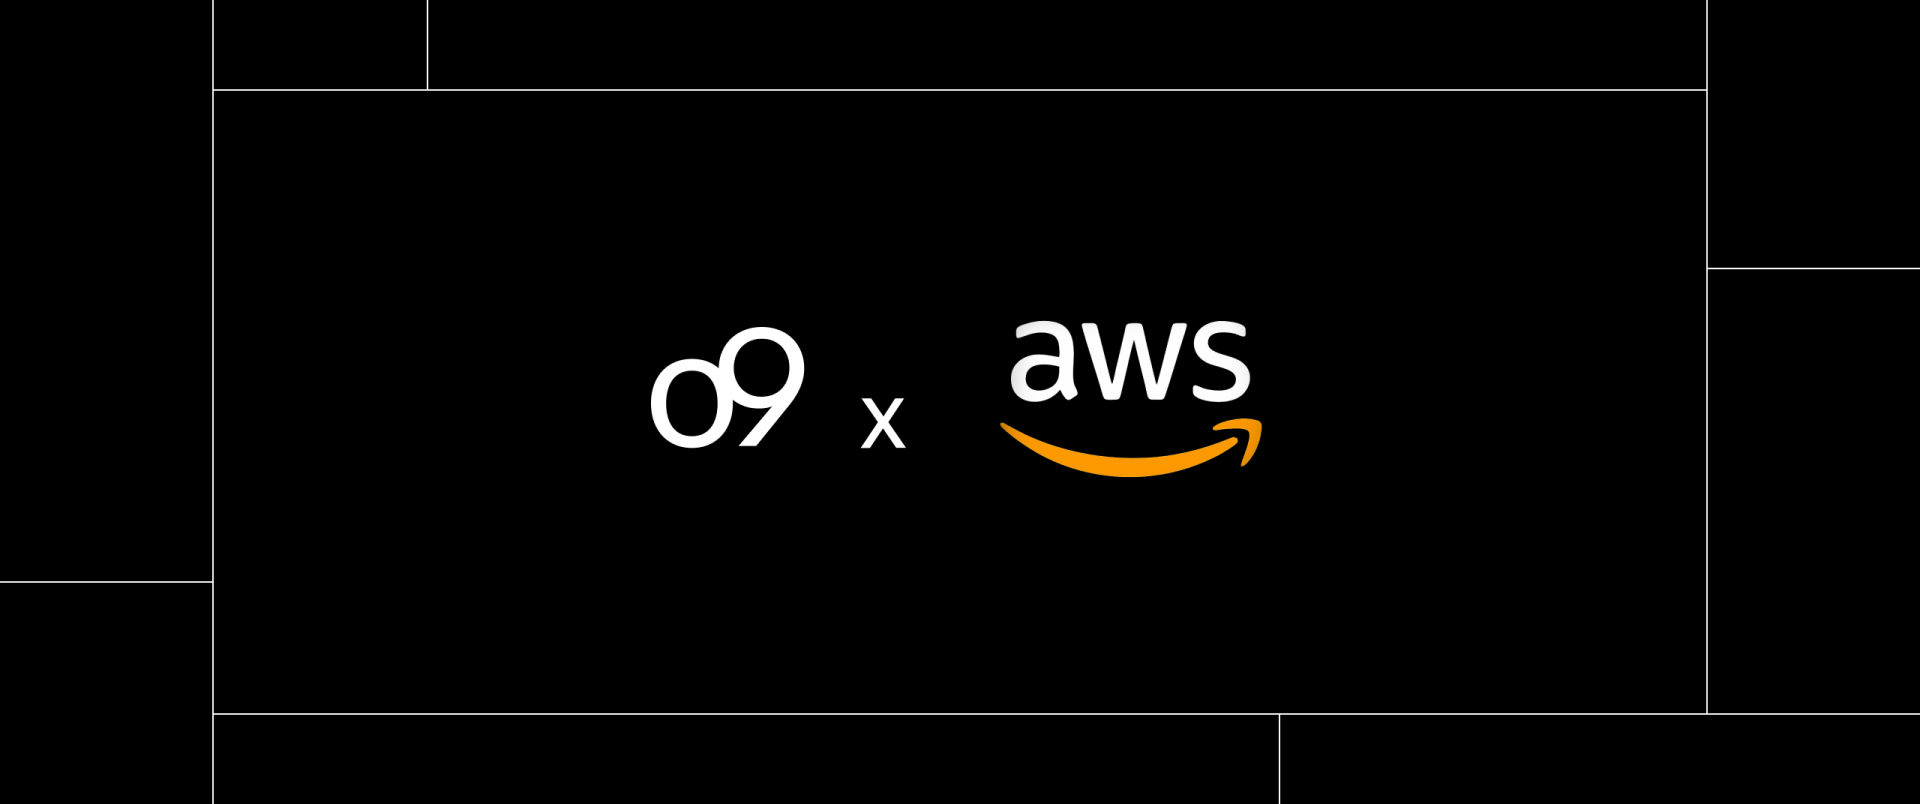 o9 Solutions and AWS Collaborate to Help Businesses Accelerate the Digital Transformation of Their Supply Chain Planning and Execution Processes